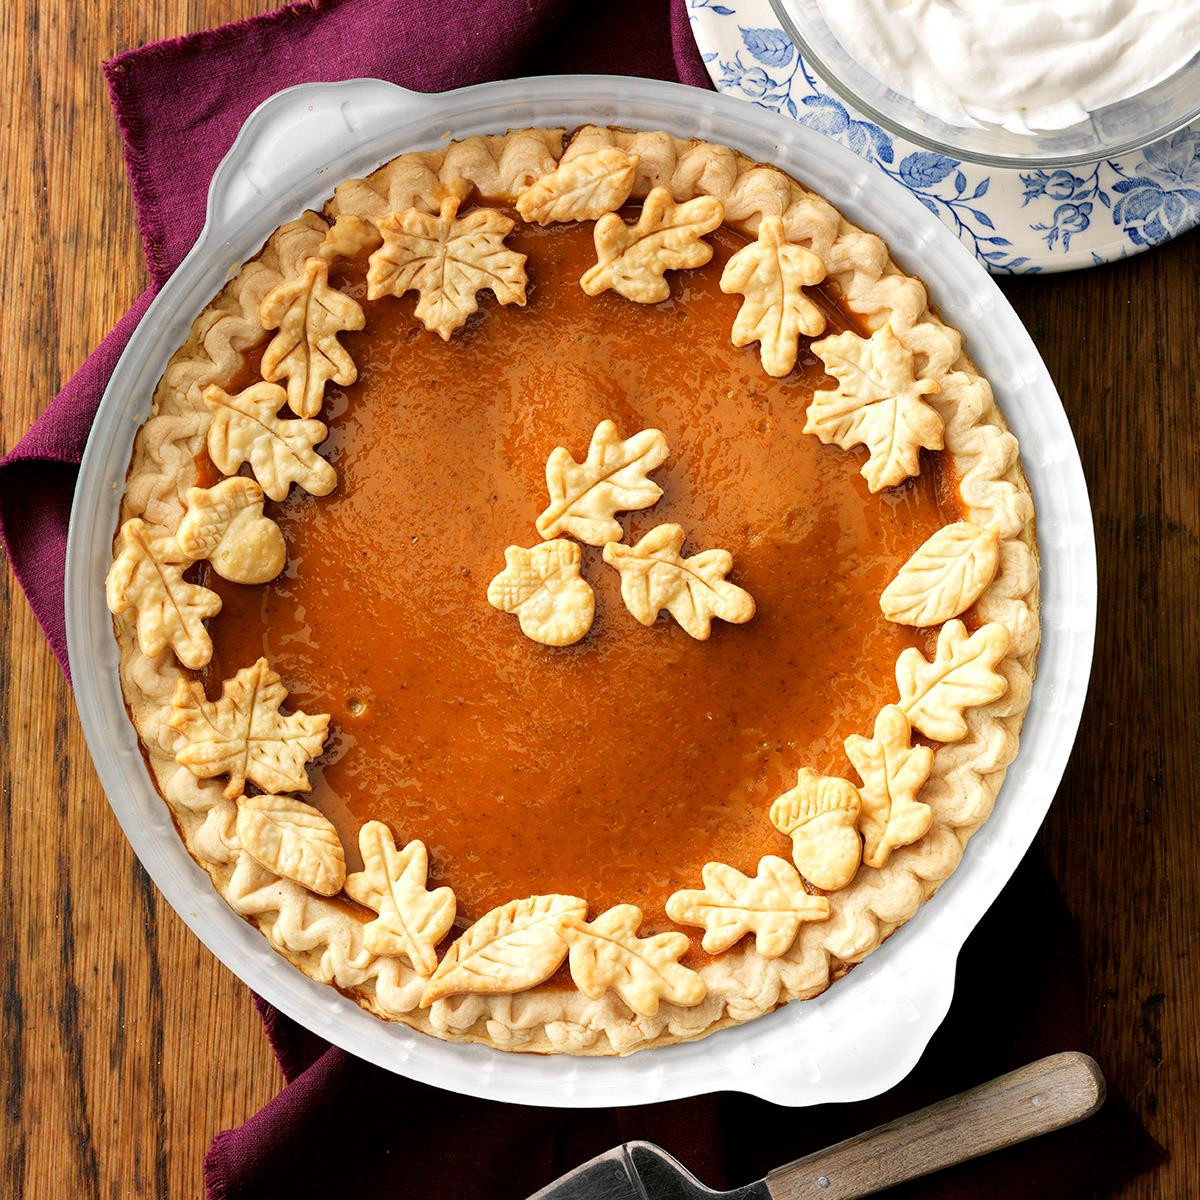 Thanksgiving Pumpkin Recipes
 25 Pumpkin Pie Recipes to Try This Year